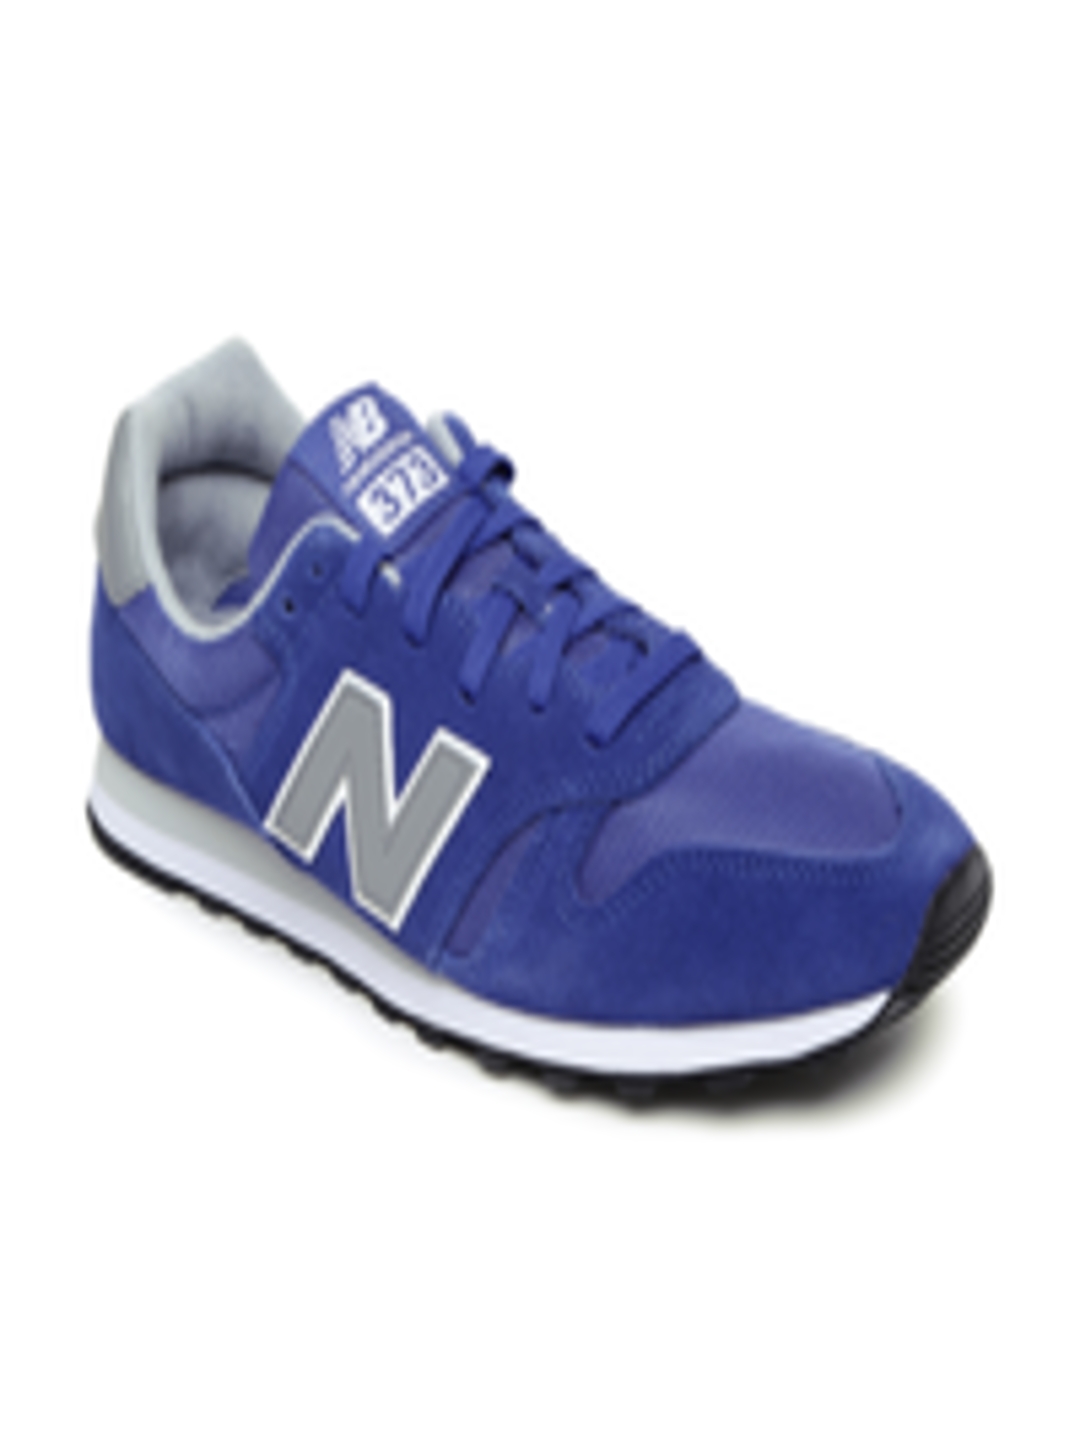 Buy New Balance Men Blue Solid ML373HB Regular Sneakers - Casual Shoes ...